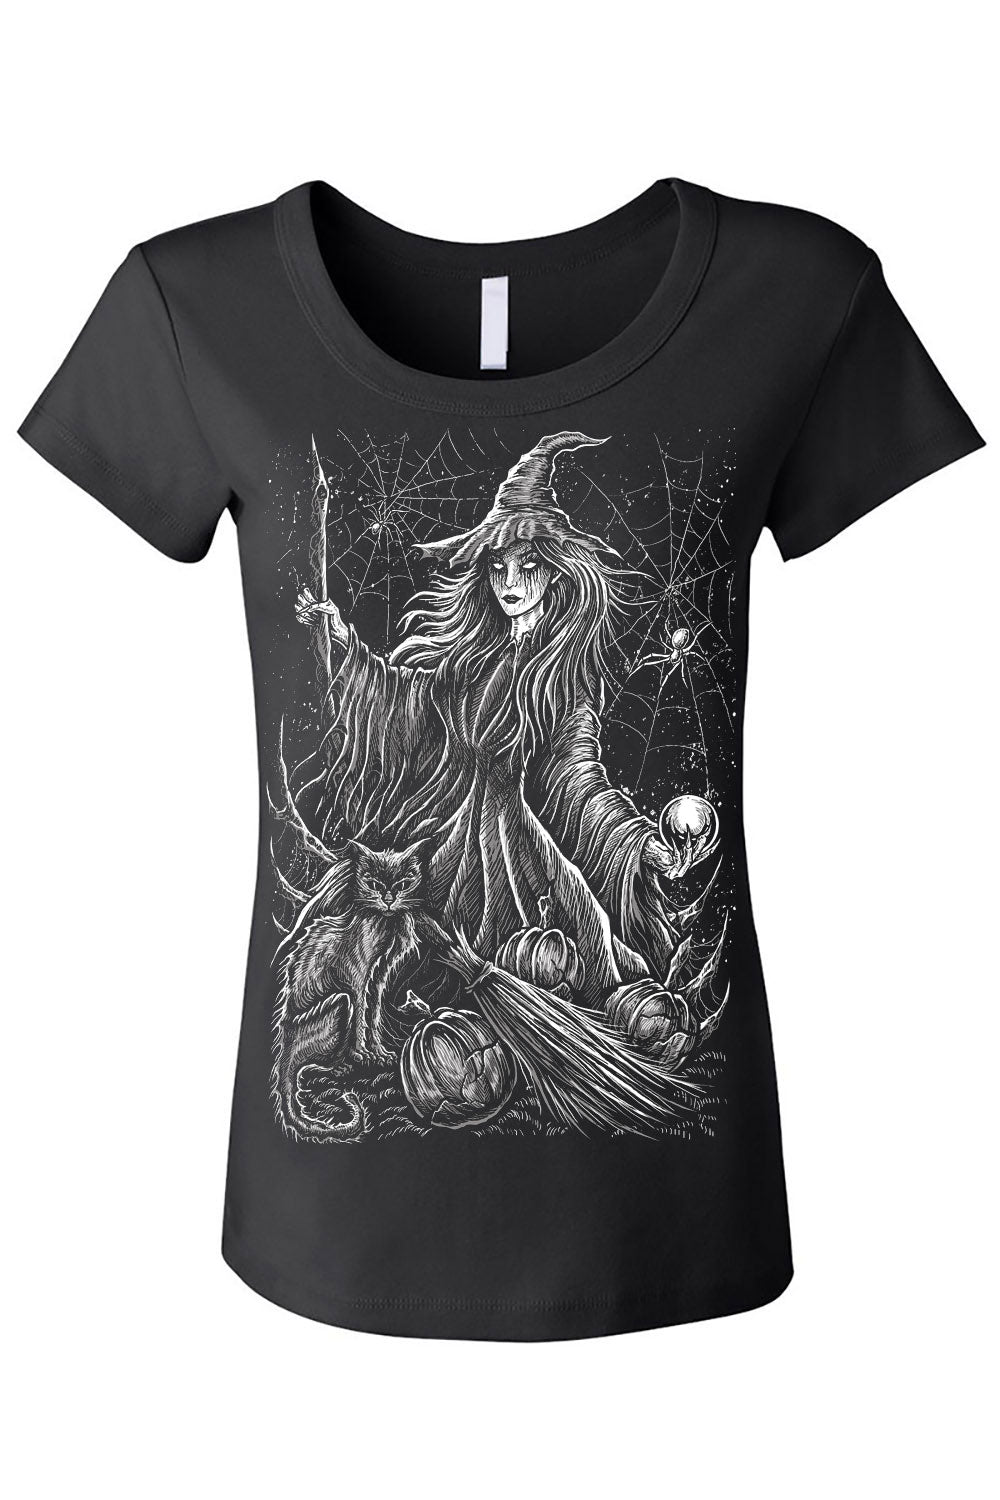 spooky witch womens shirt